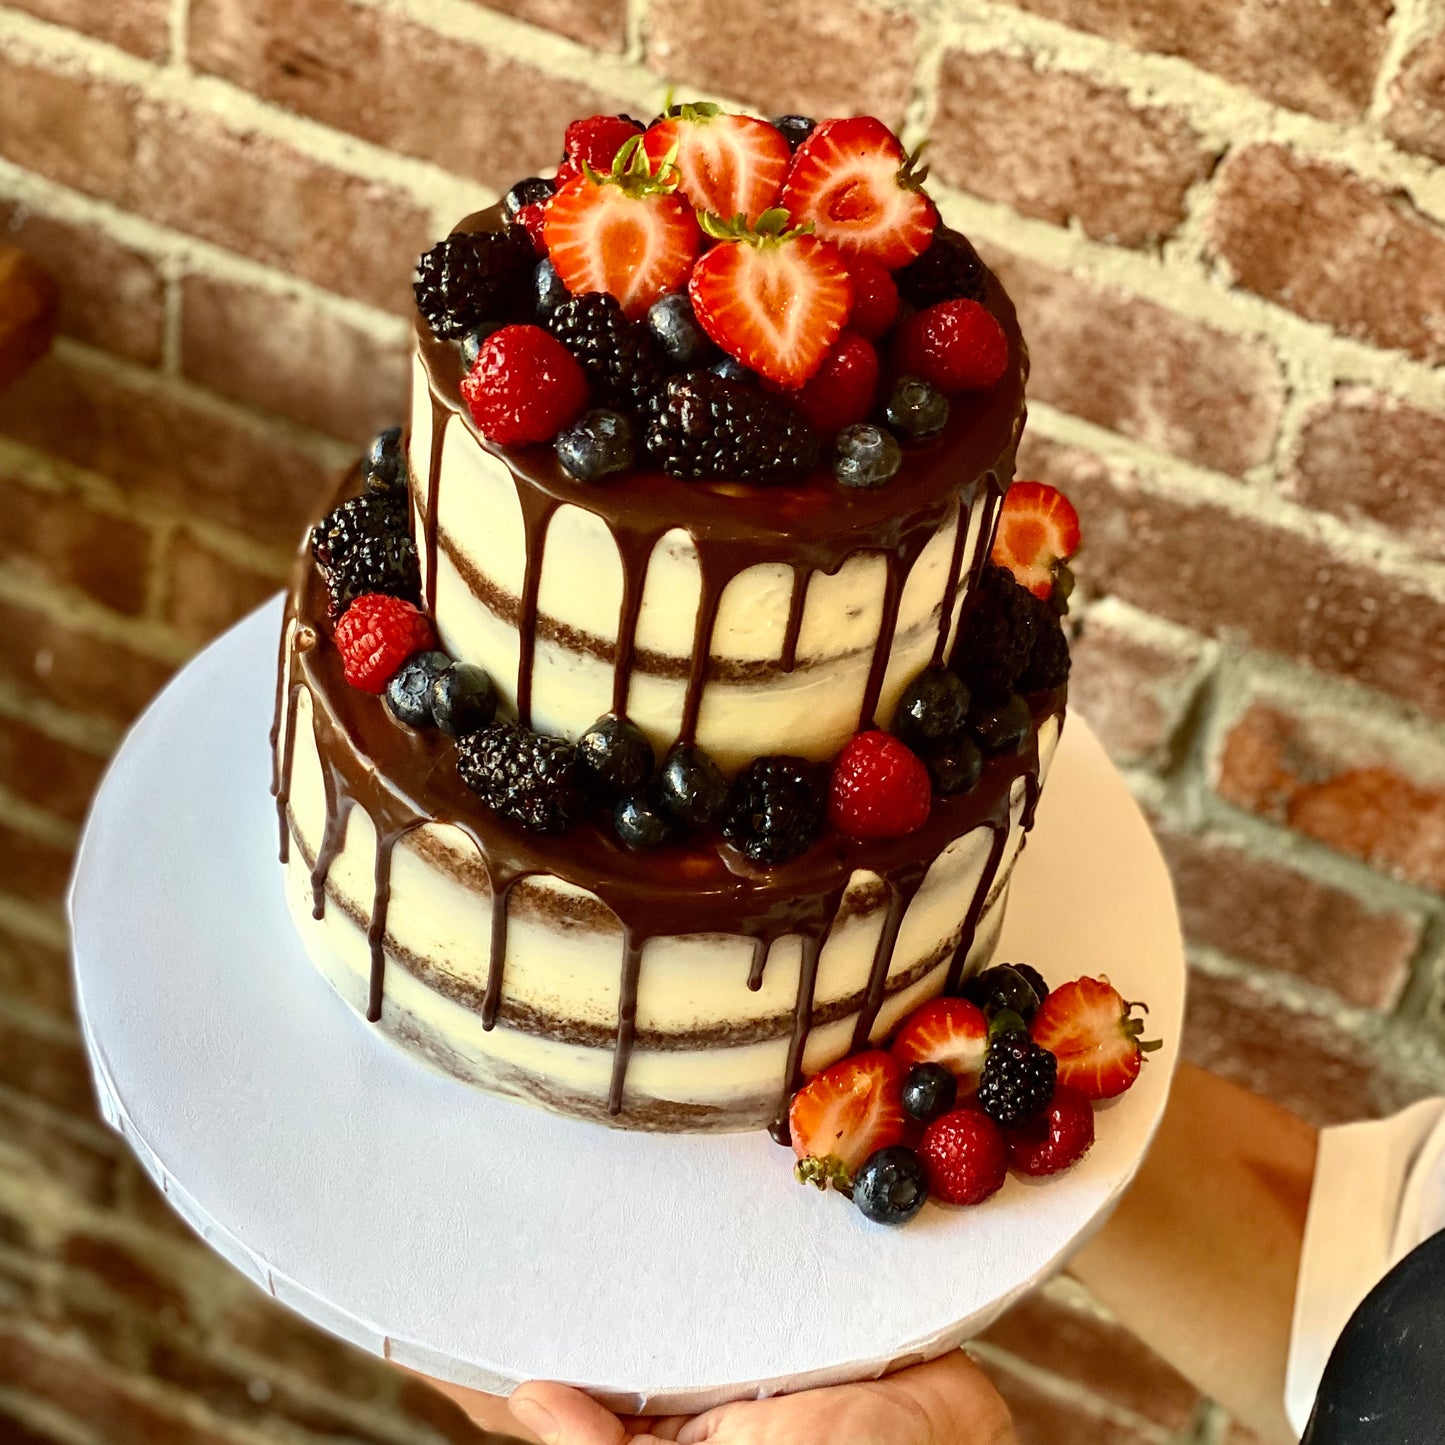 Two-tiered wedding cake with chocolate drip and fresh fruit